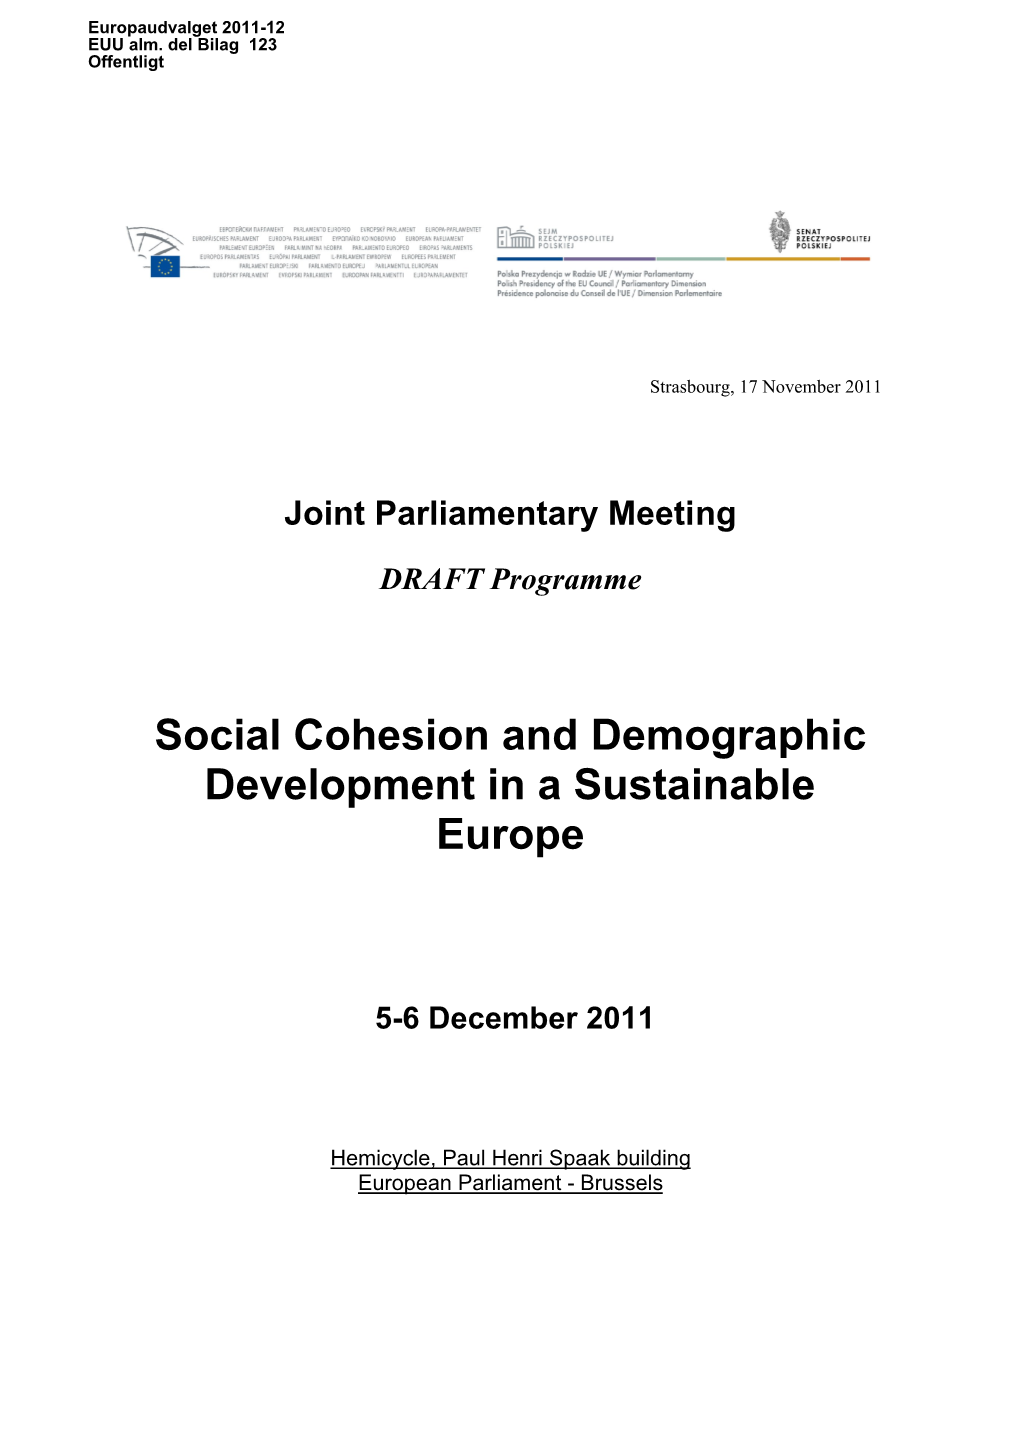 Social Cohesion and Demographic Development in a Sustainable Europe